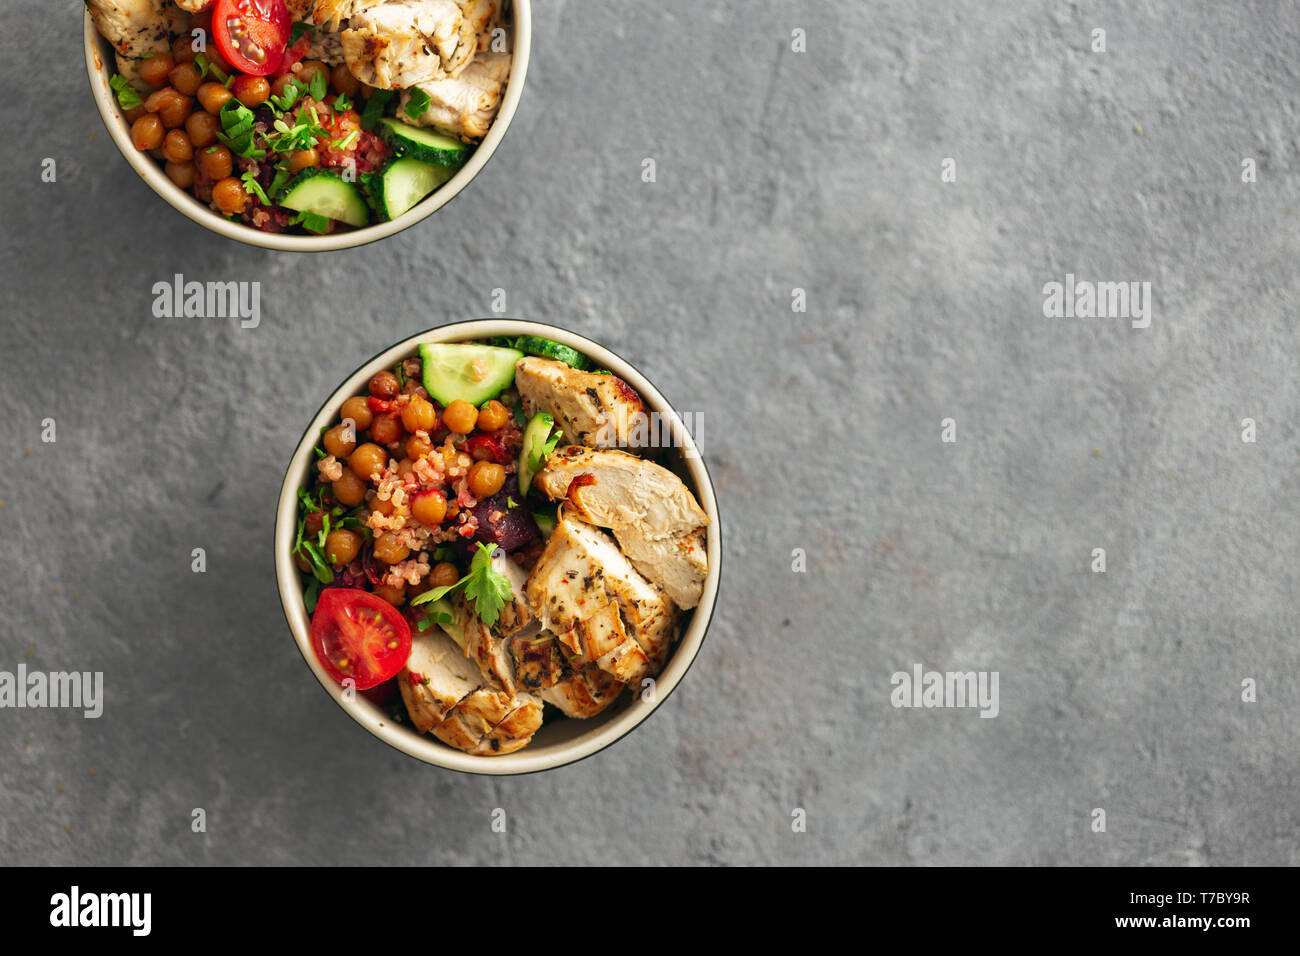 Healthy food bowl buddha top view asian table styling with copy space. Grilled chicken steak with spicy chickpeas, quinoa and baked beetroot Stock Photo